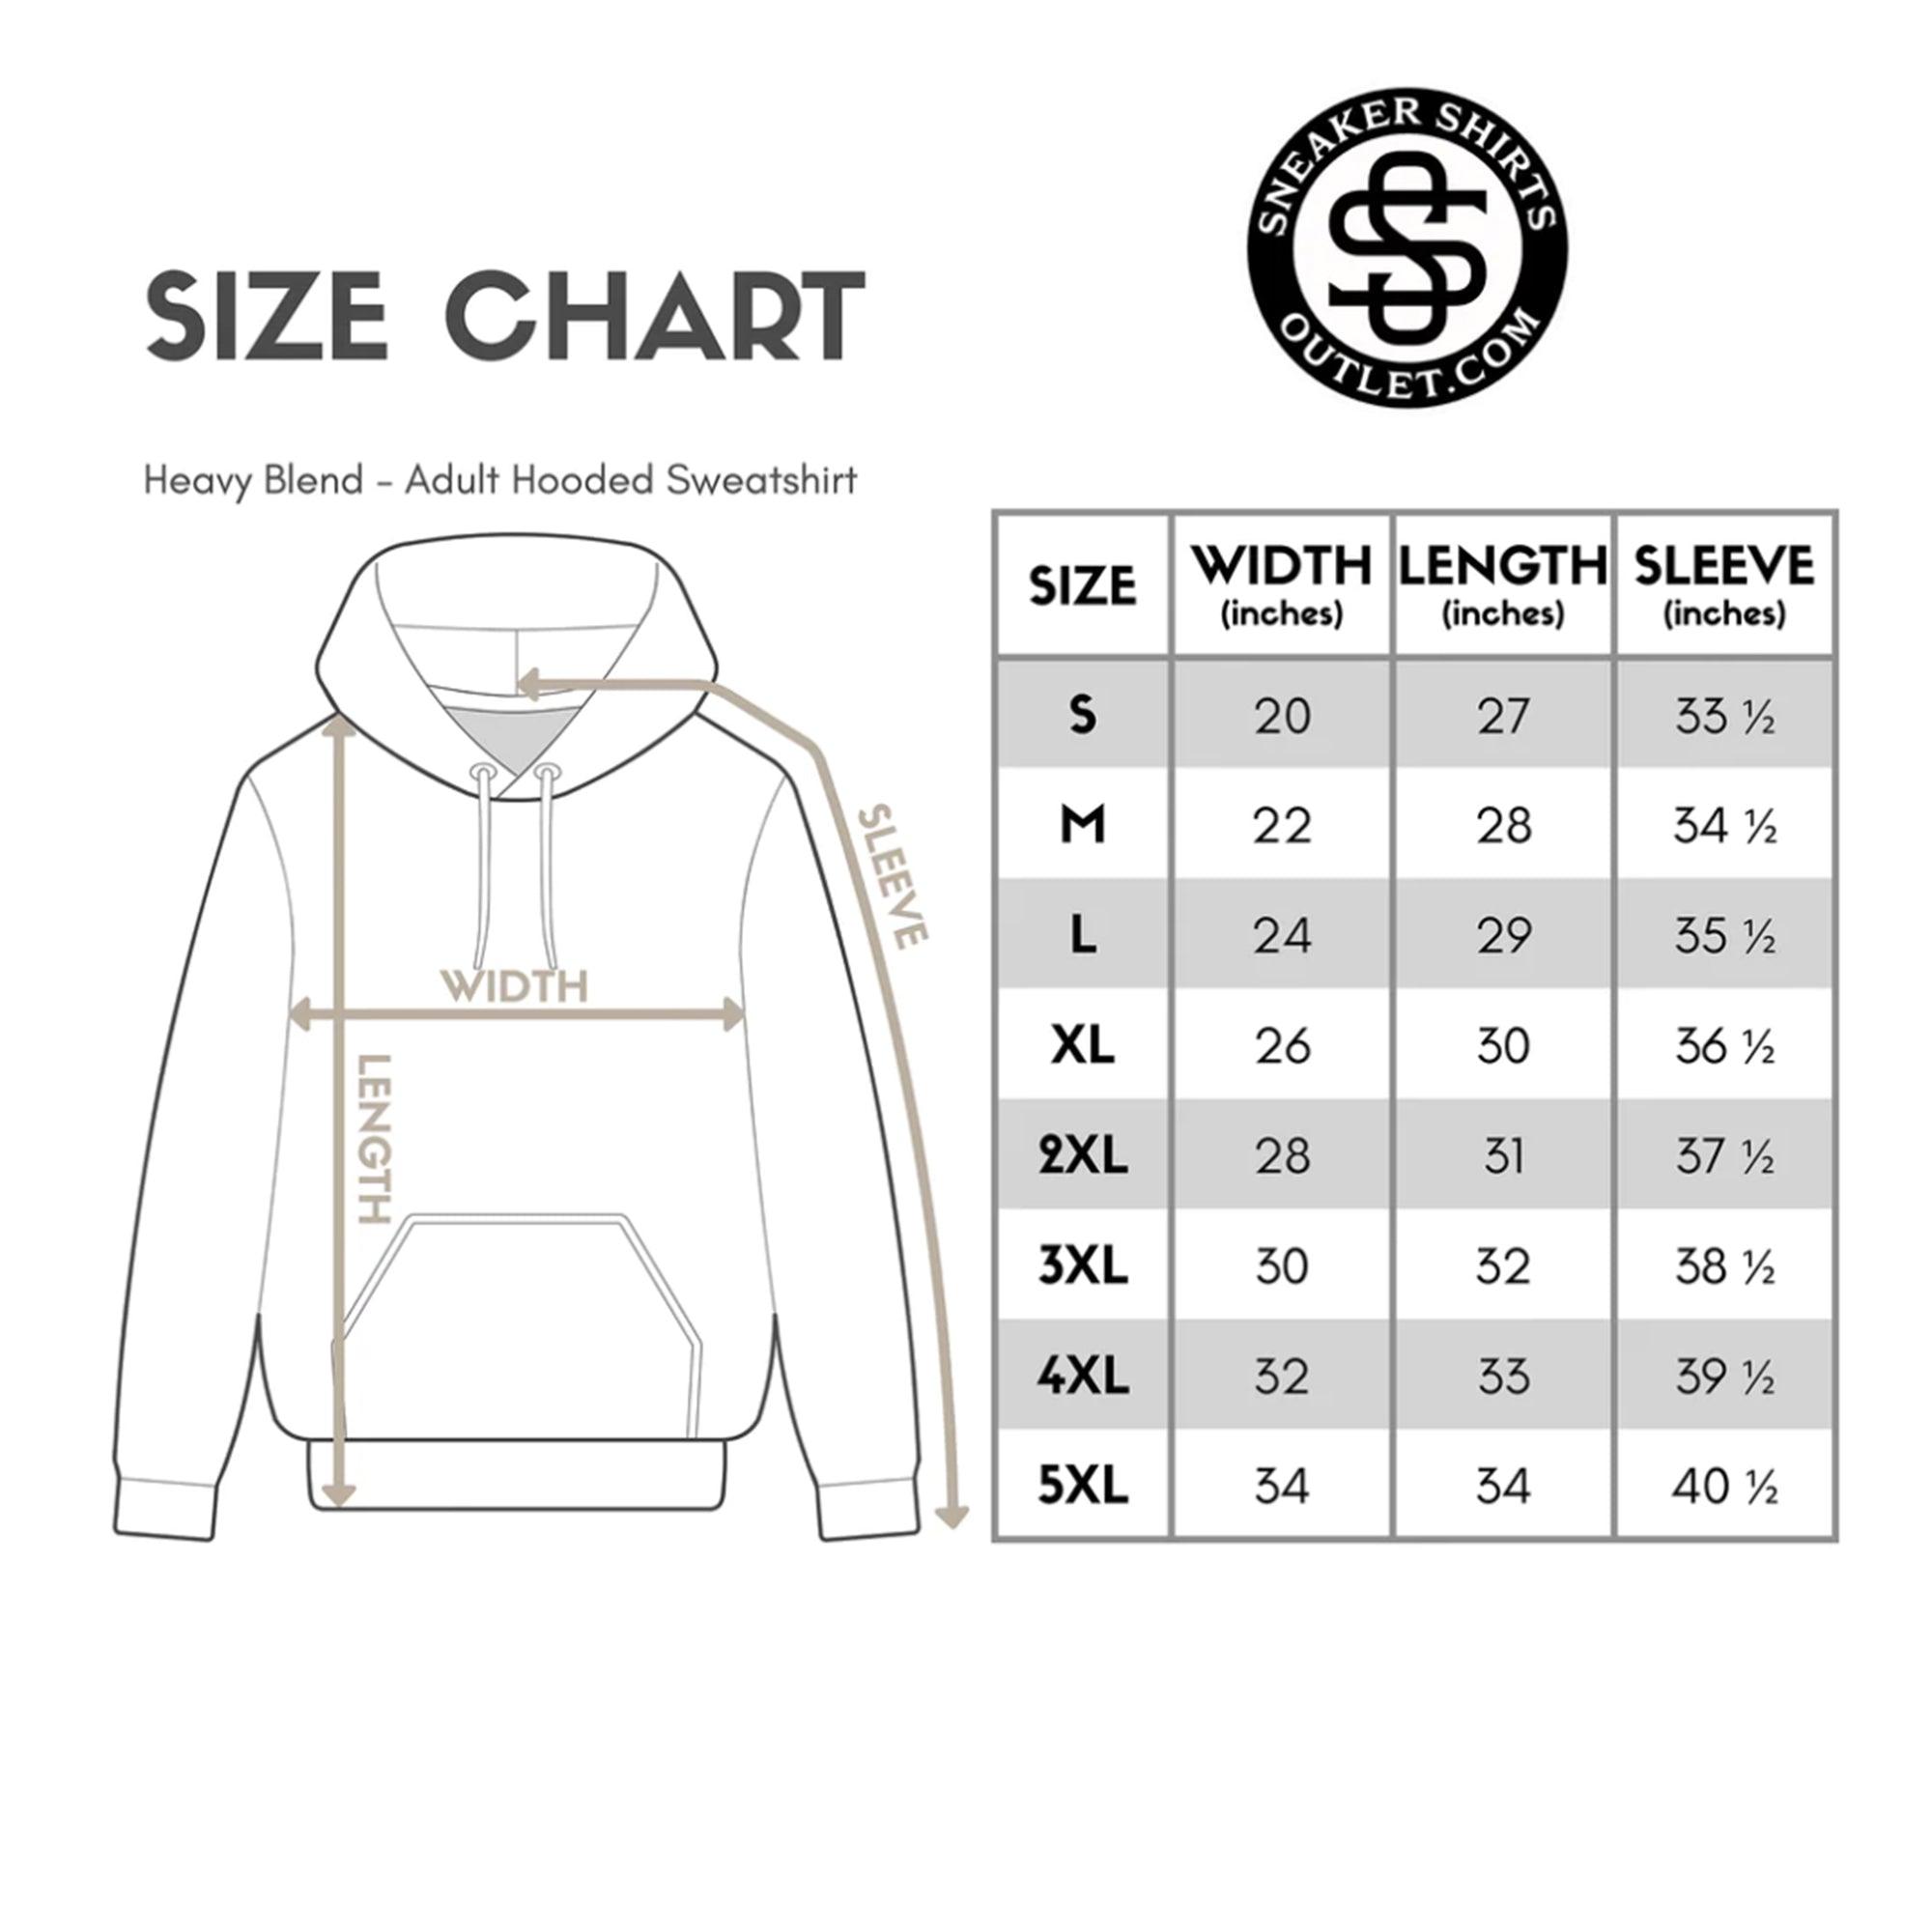 Yeezy Boost 350 V2 Dazzling Blue Friday the 13th Hoodie size chart photo